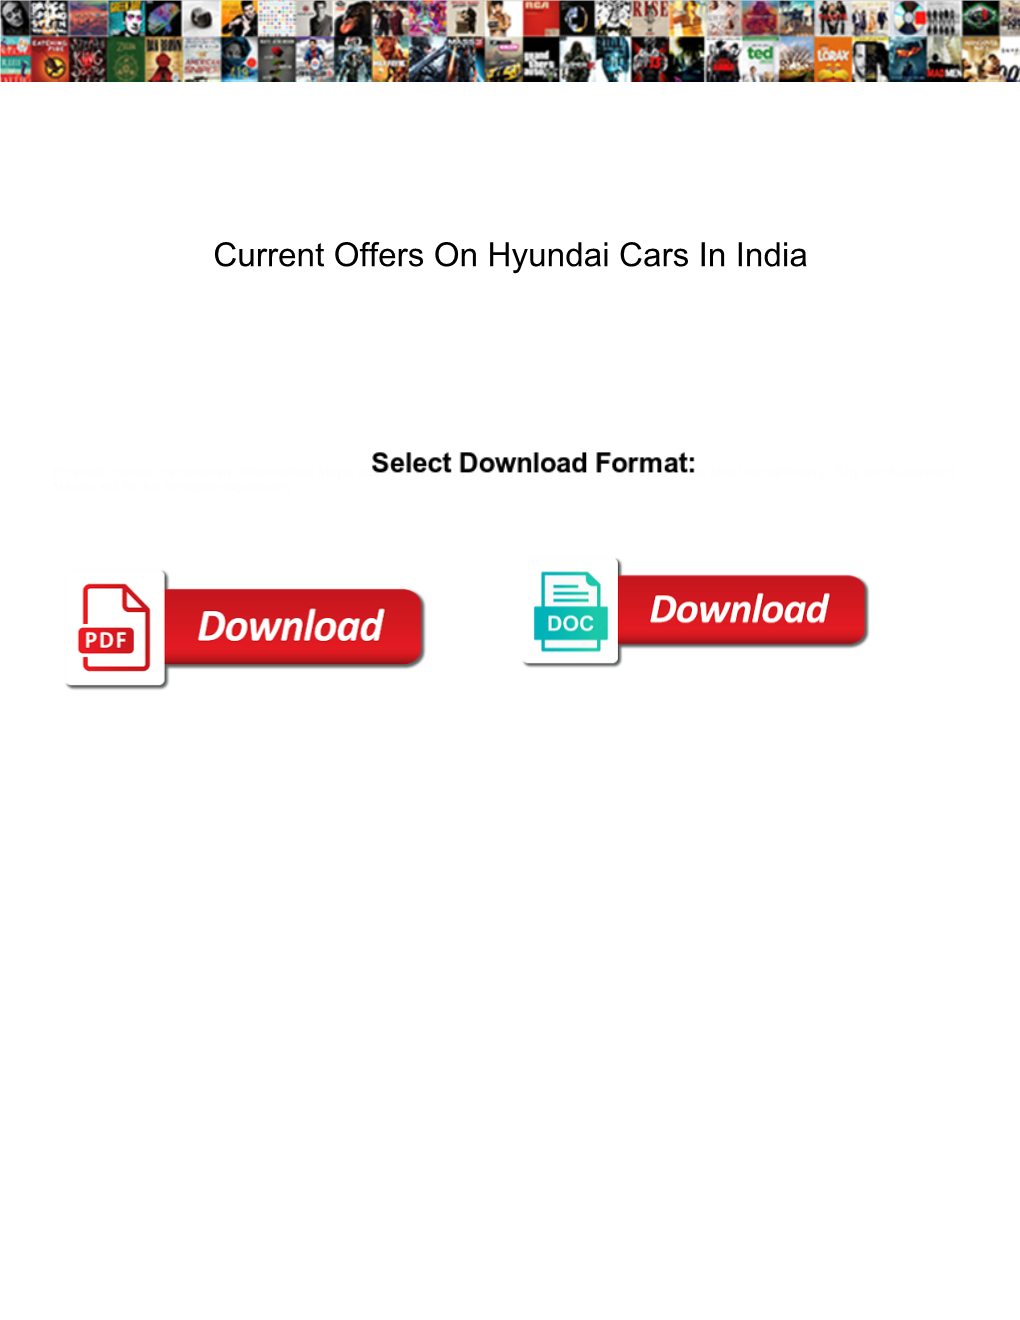 Current Offers on Hyundai Cars in India